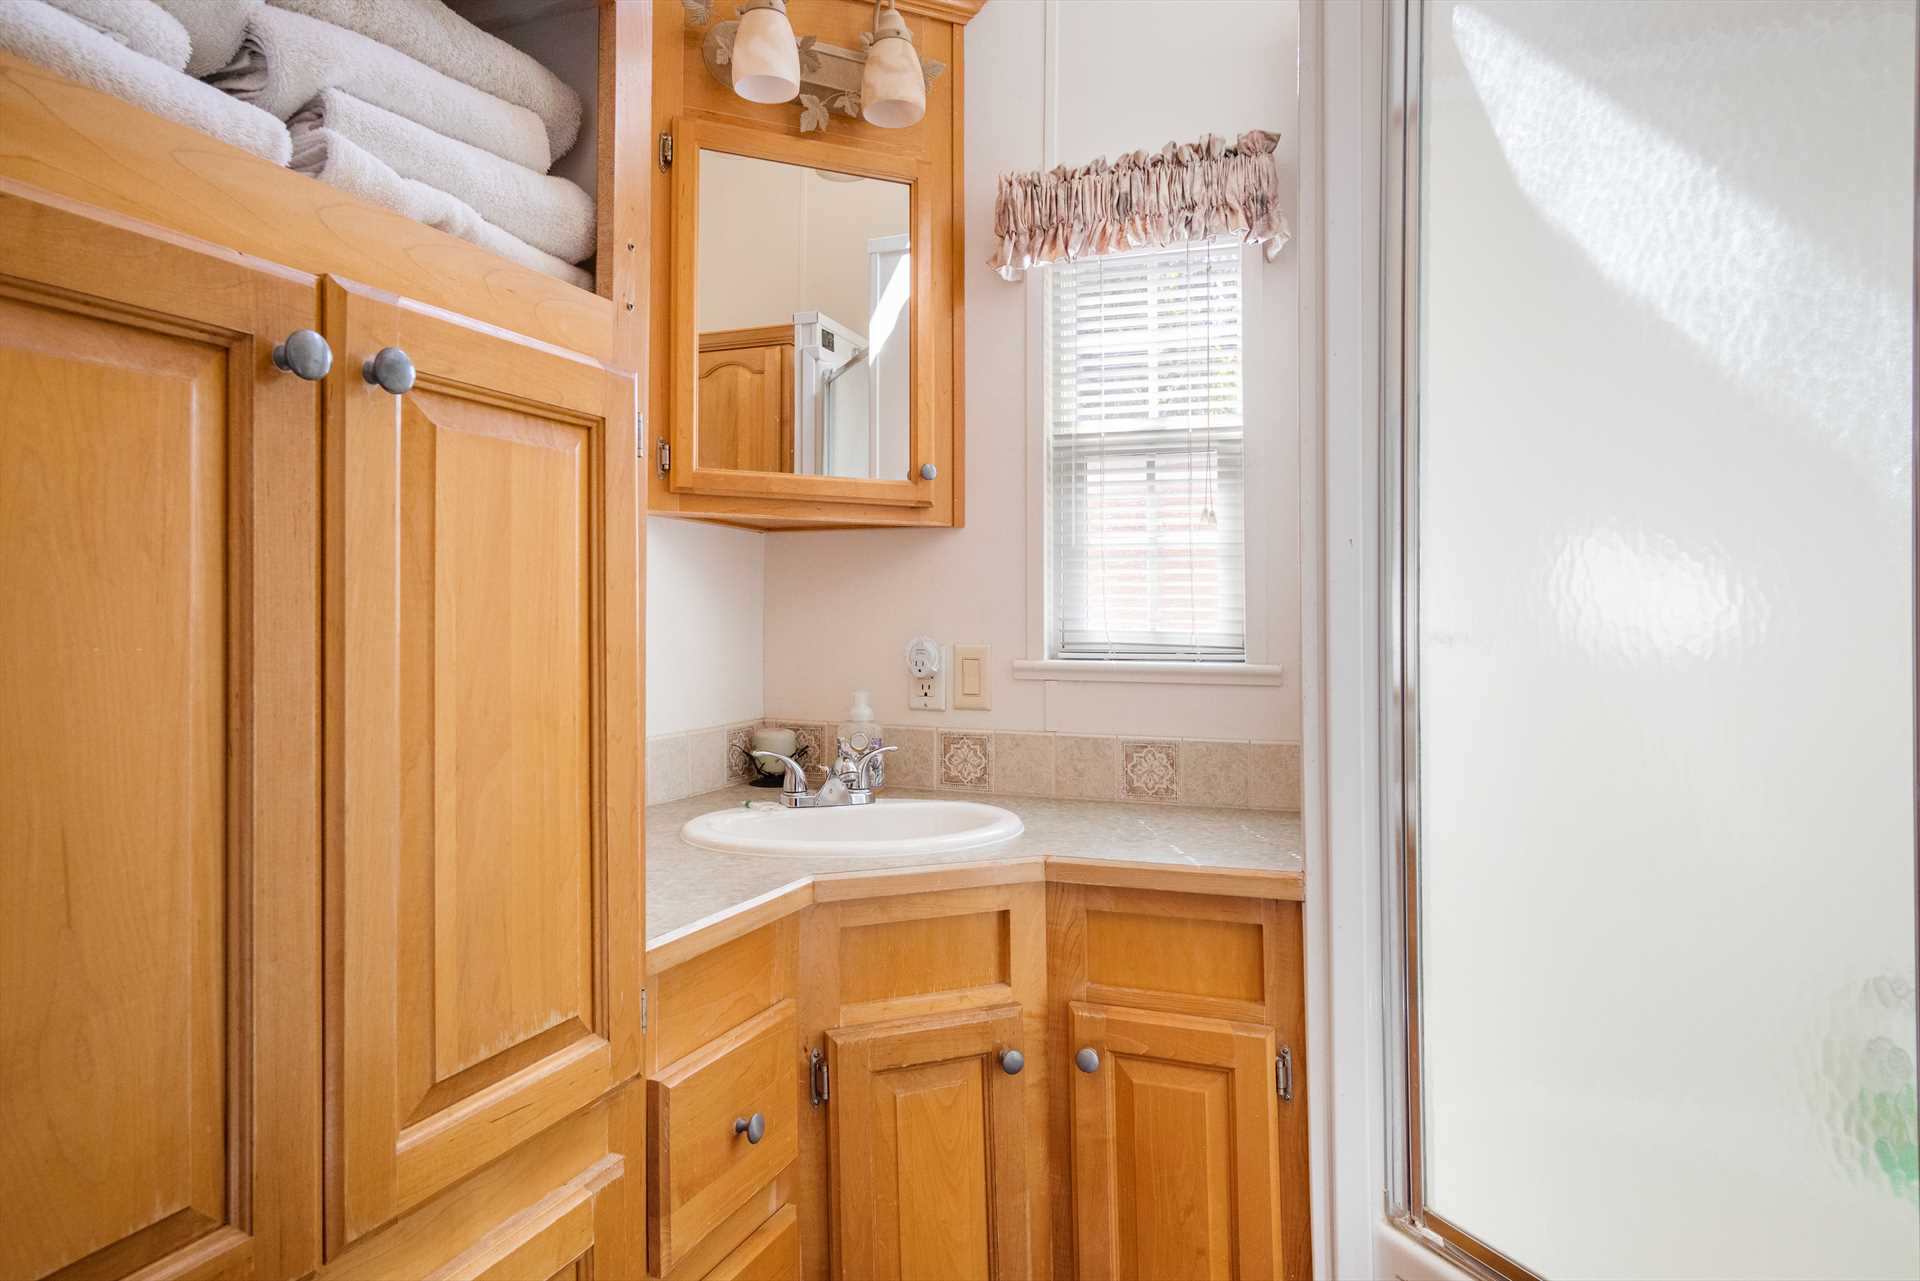                                                 The cabin's immaculate full bath includes a shower stall and plenty of clean linens.